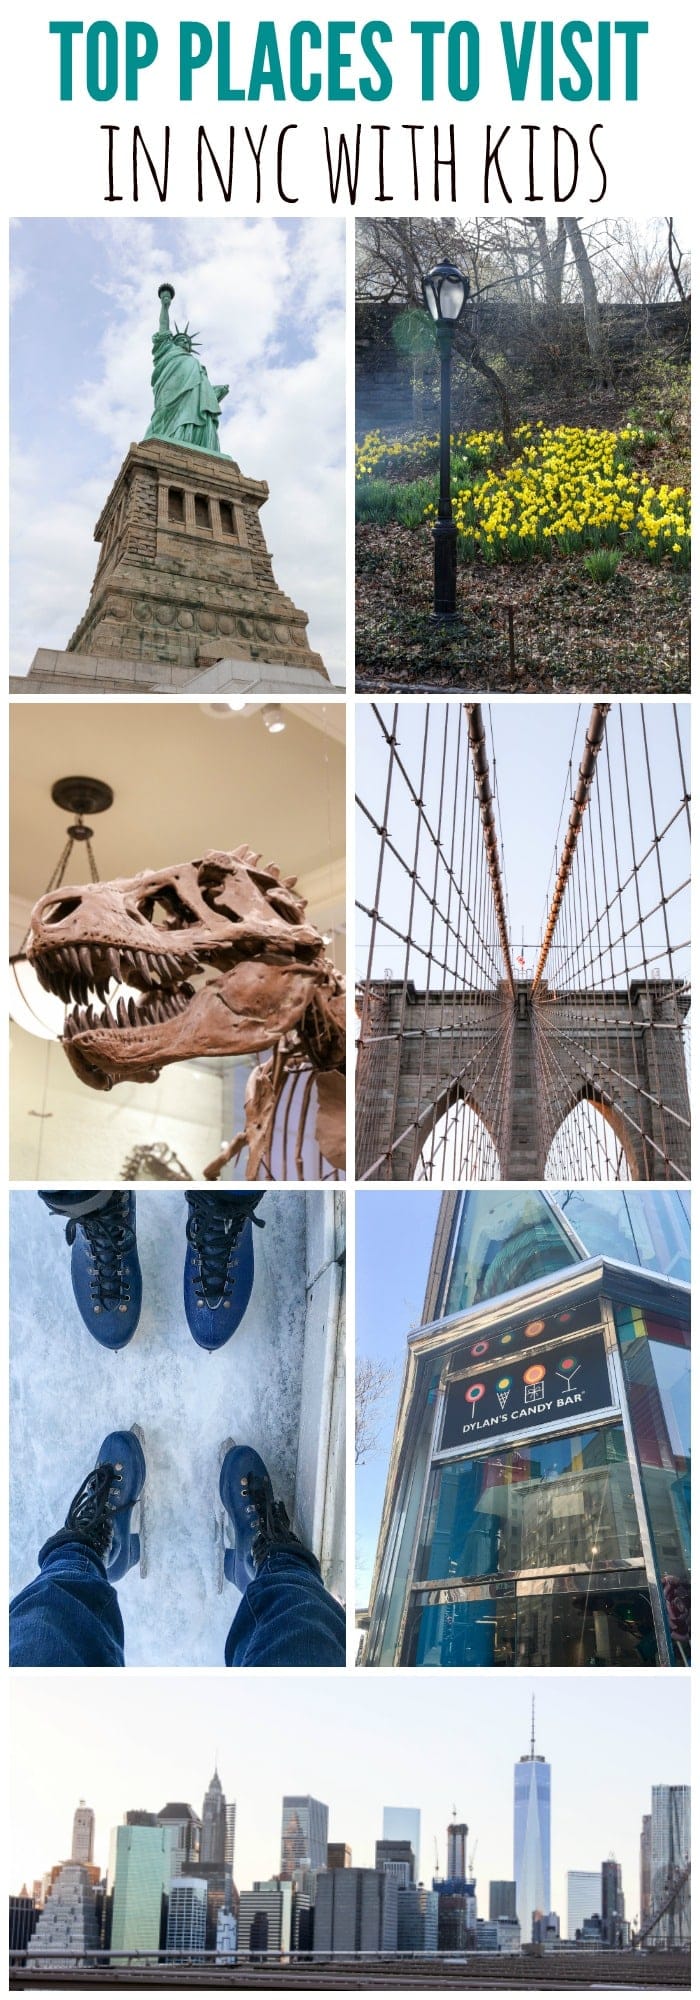 Top Places to Visit in NYC with kids - from the Statue of Liberty to Central Park, this is a great list of kid-friendly places to visit in Manhattan!